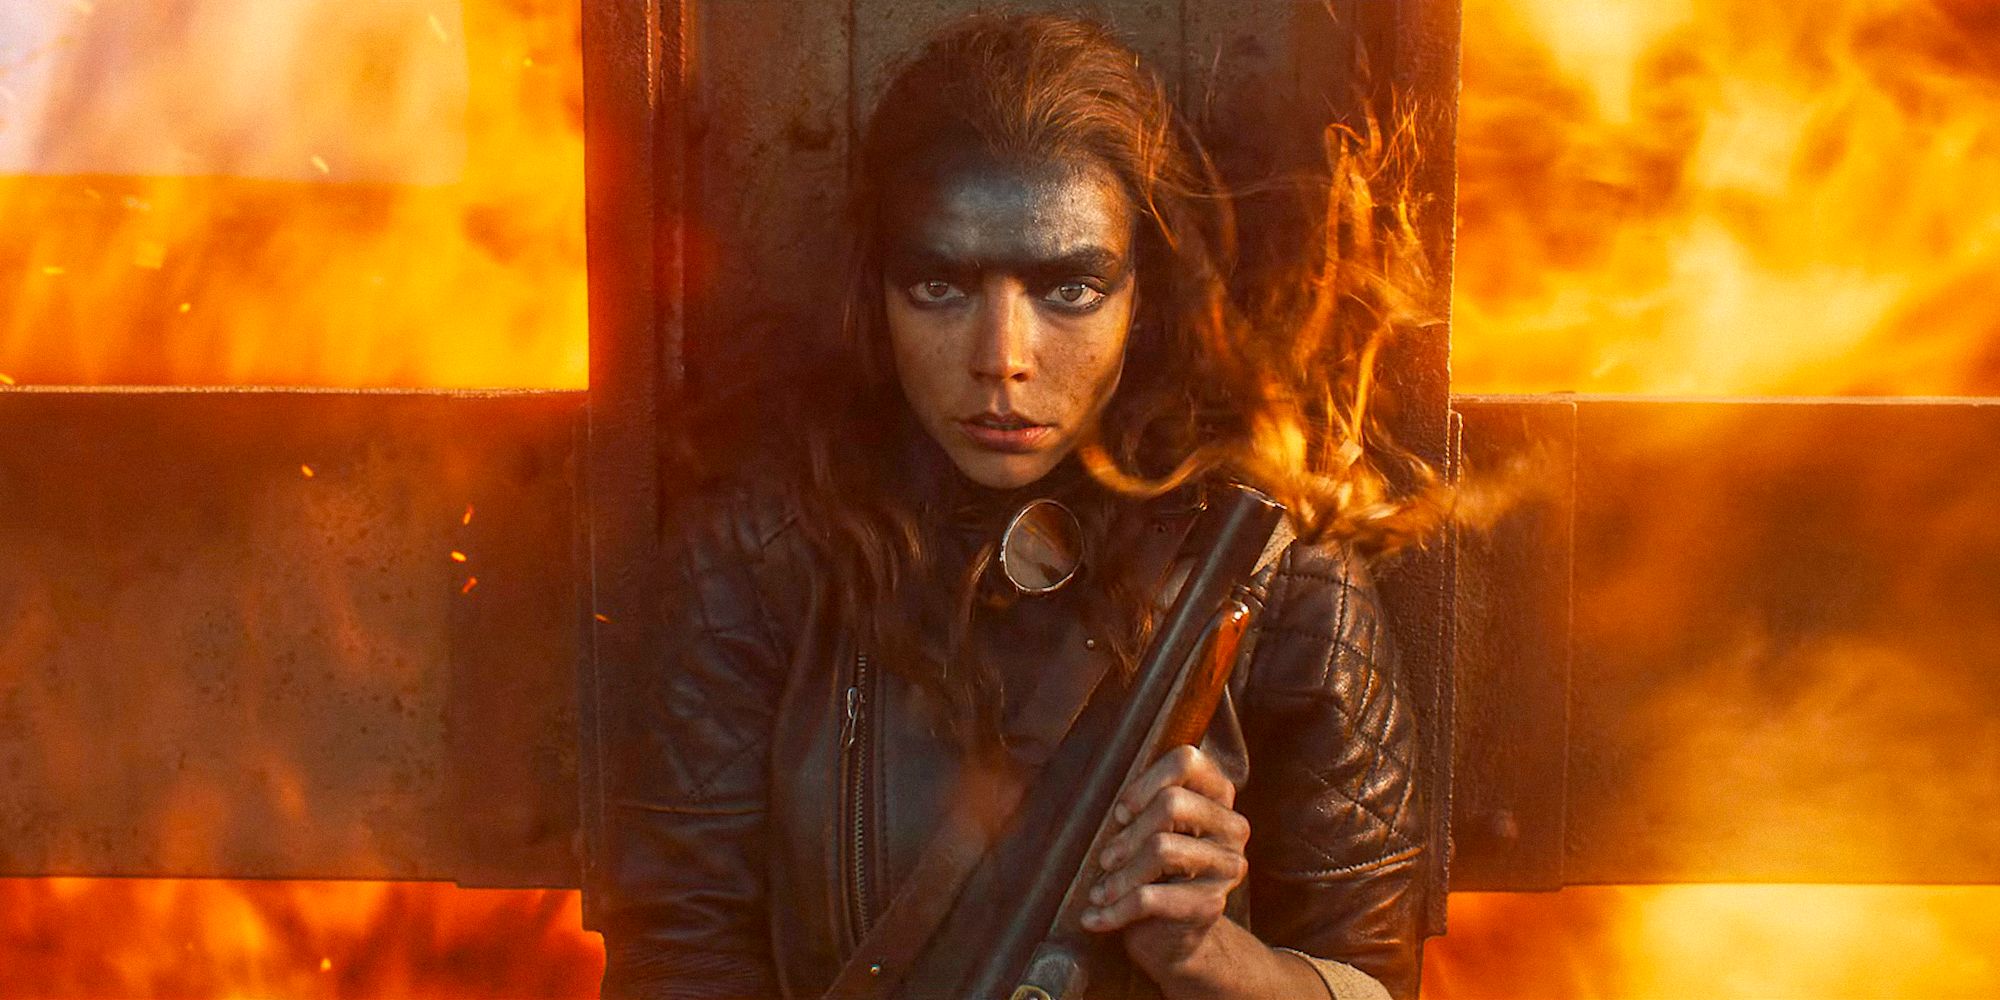 Furiosa, played by Anya Taylor-Joy, hiding behind a post from an explosion of flames. She is holding a gun, with her long hair blowing. Her face is painted with black oil.